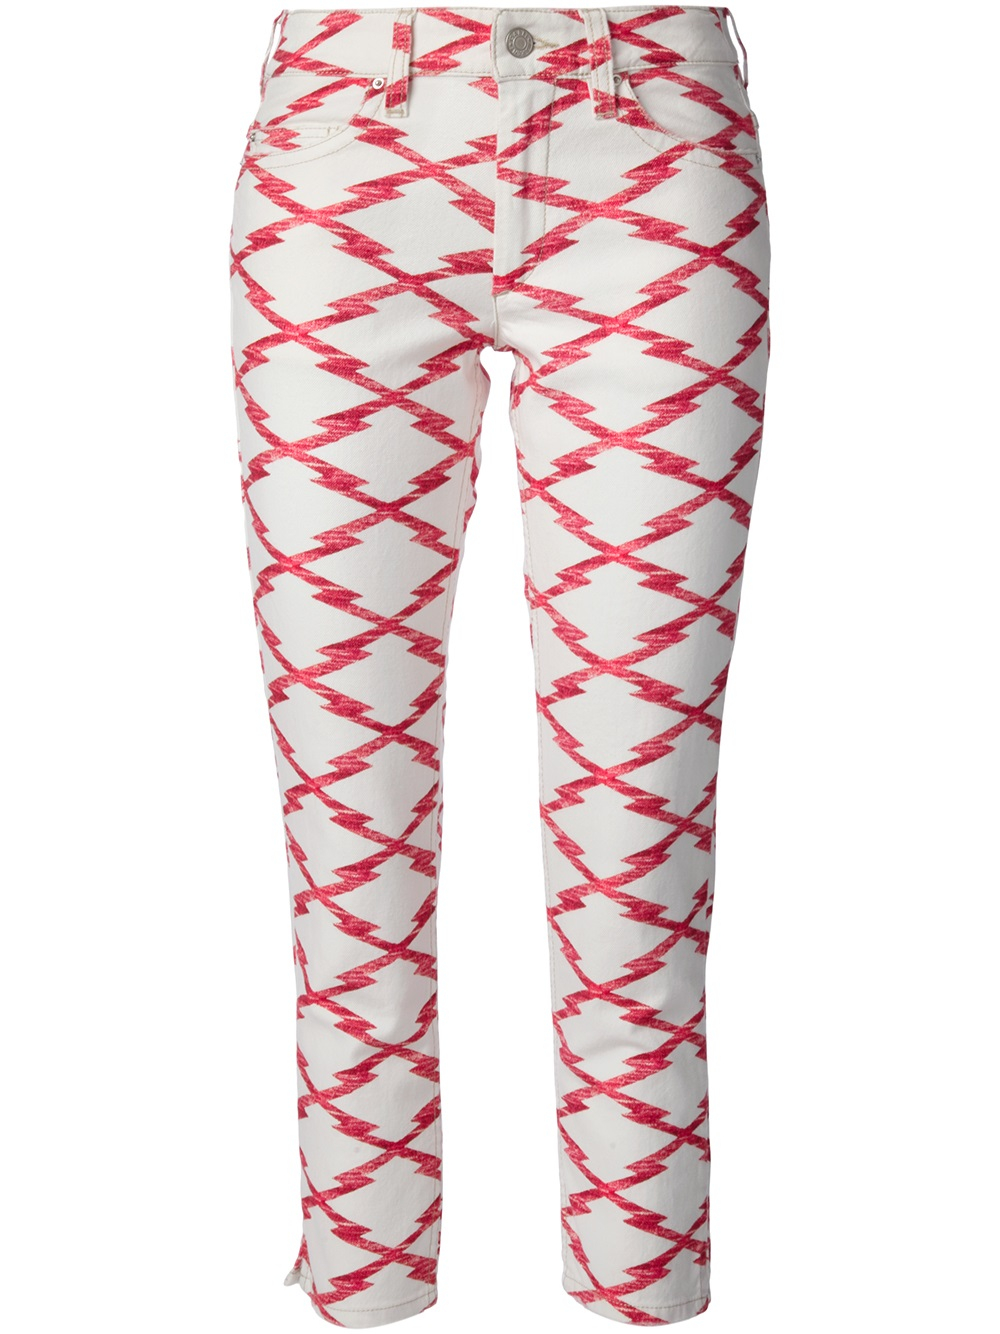 Lyst - Étoile Isabel Marant Nessa Jeans in Red